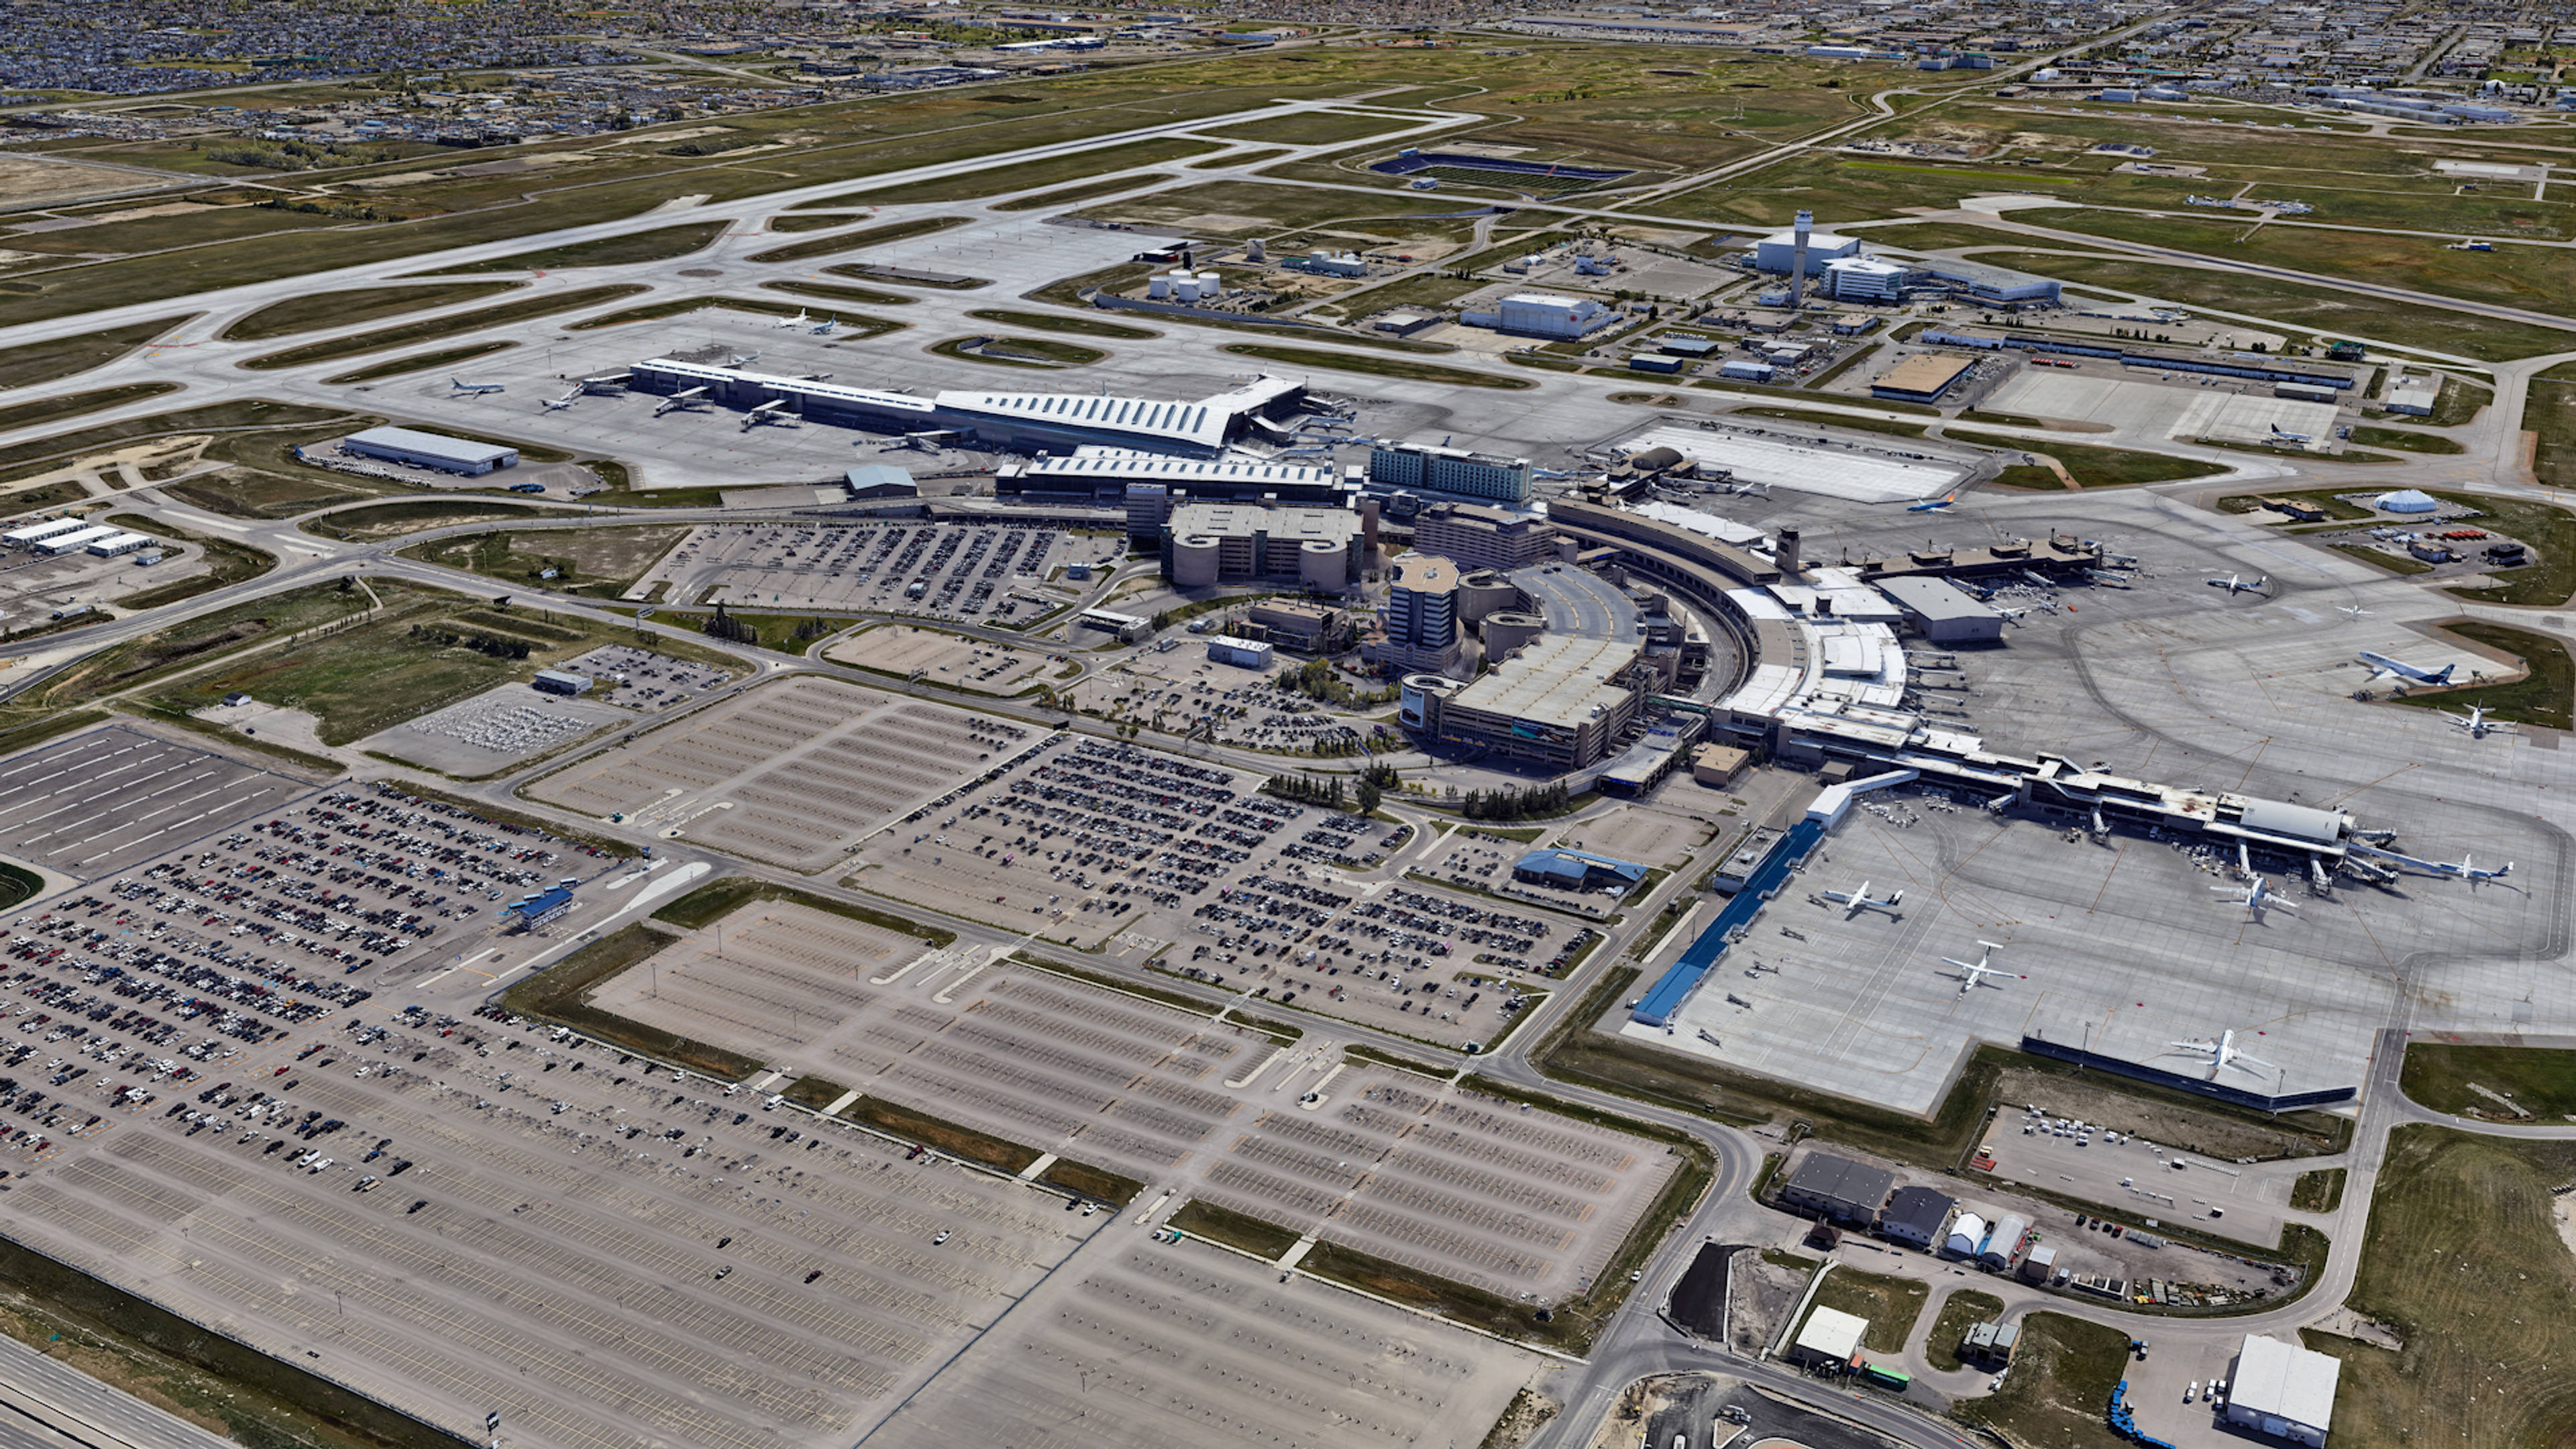 Aerial View of Calgary Airport Parking